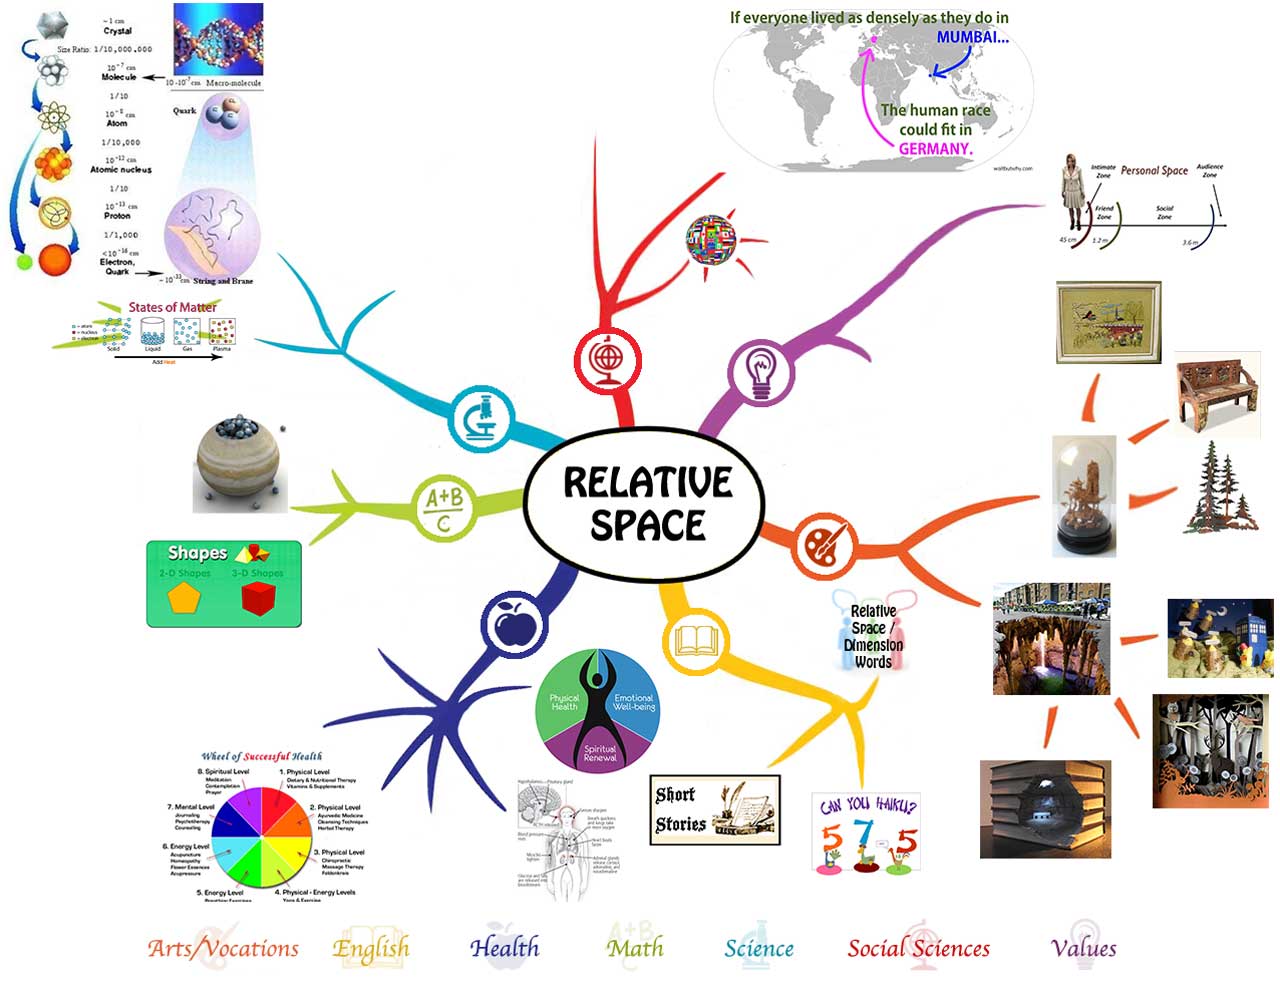 Teaching Everything in the Context of Relative Space, Relative Space Mindmap, Relative Space Lesson Plan, One Community school, One Community education, teaching strategies for life, curriculum for life, One Community, transformational education, open source education, free-shared education, eco-education, curriculum for life, strategies of leadership, education for life, transformational education, new paradigm learning, genius training, the ultimate classroom, teaching tools for life, for the highest good of all, Waldorf, Study Technology, Study Tech, Montessori, Reggio, 8 Intelligences, Bloom's Taxonomy, Orff, our children are our future, the future of kids, One Community kids, One Community families, education for life, transformational living, thinking out of the box, learning how to learn - not what to learn, learning to think, using your brain for a change, brainy builder